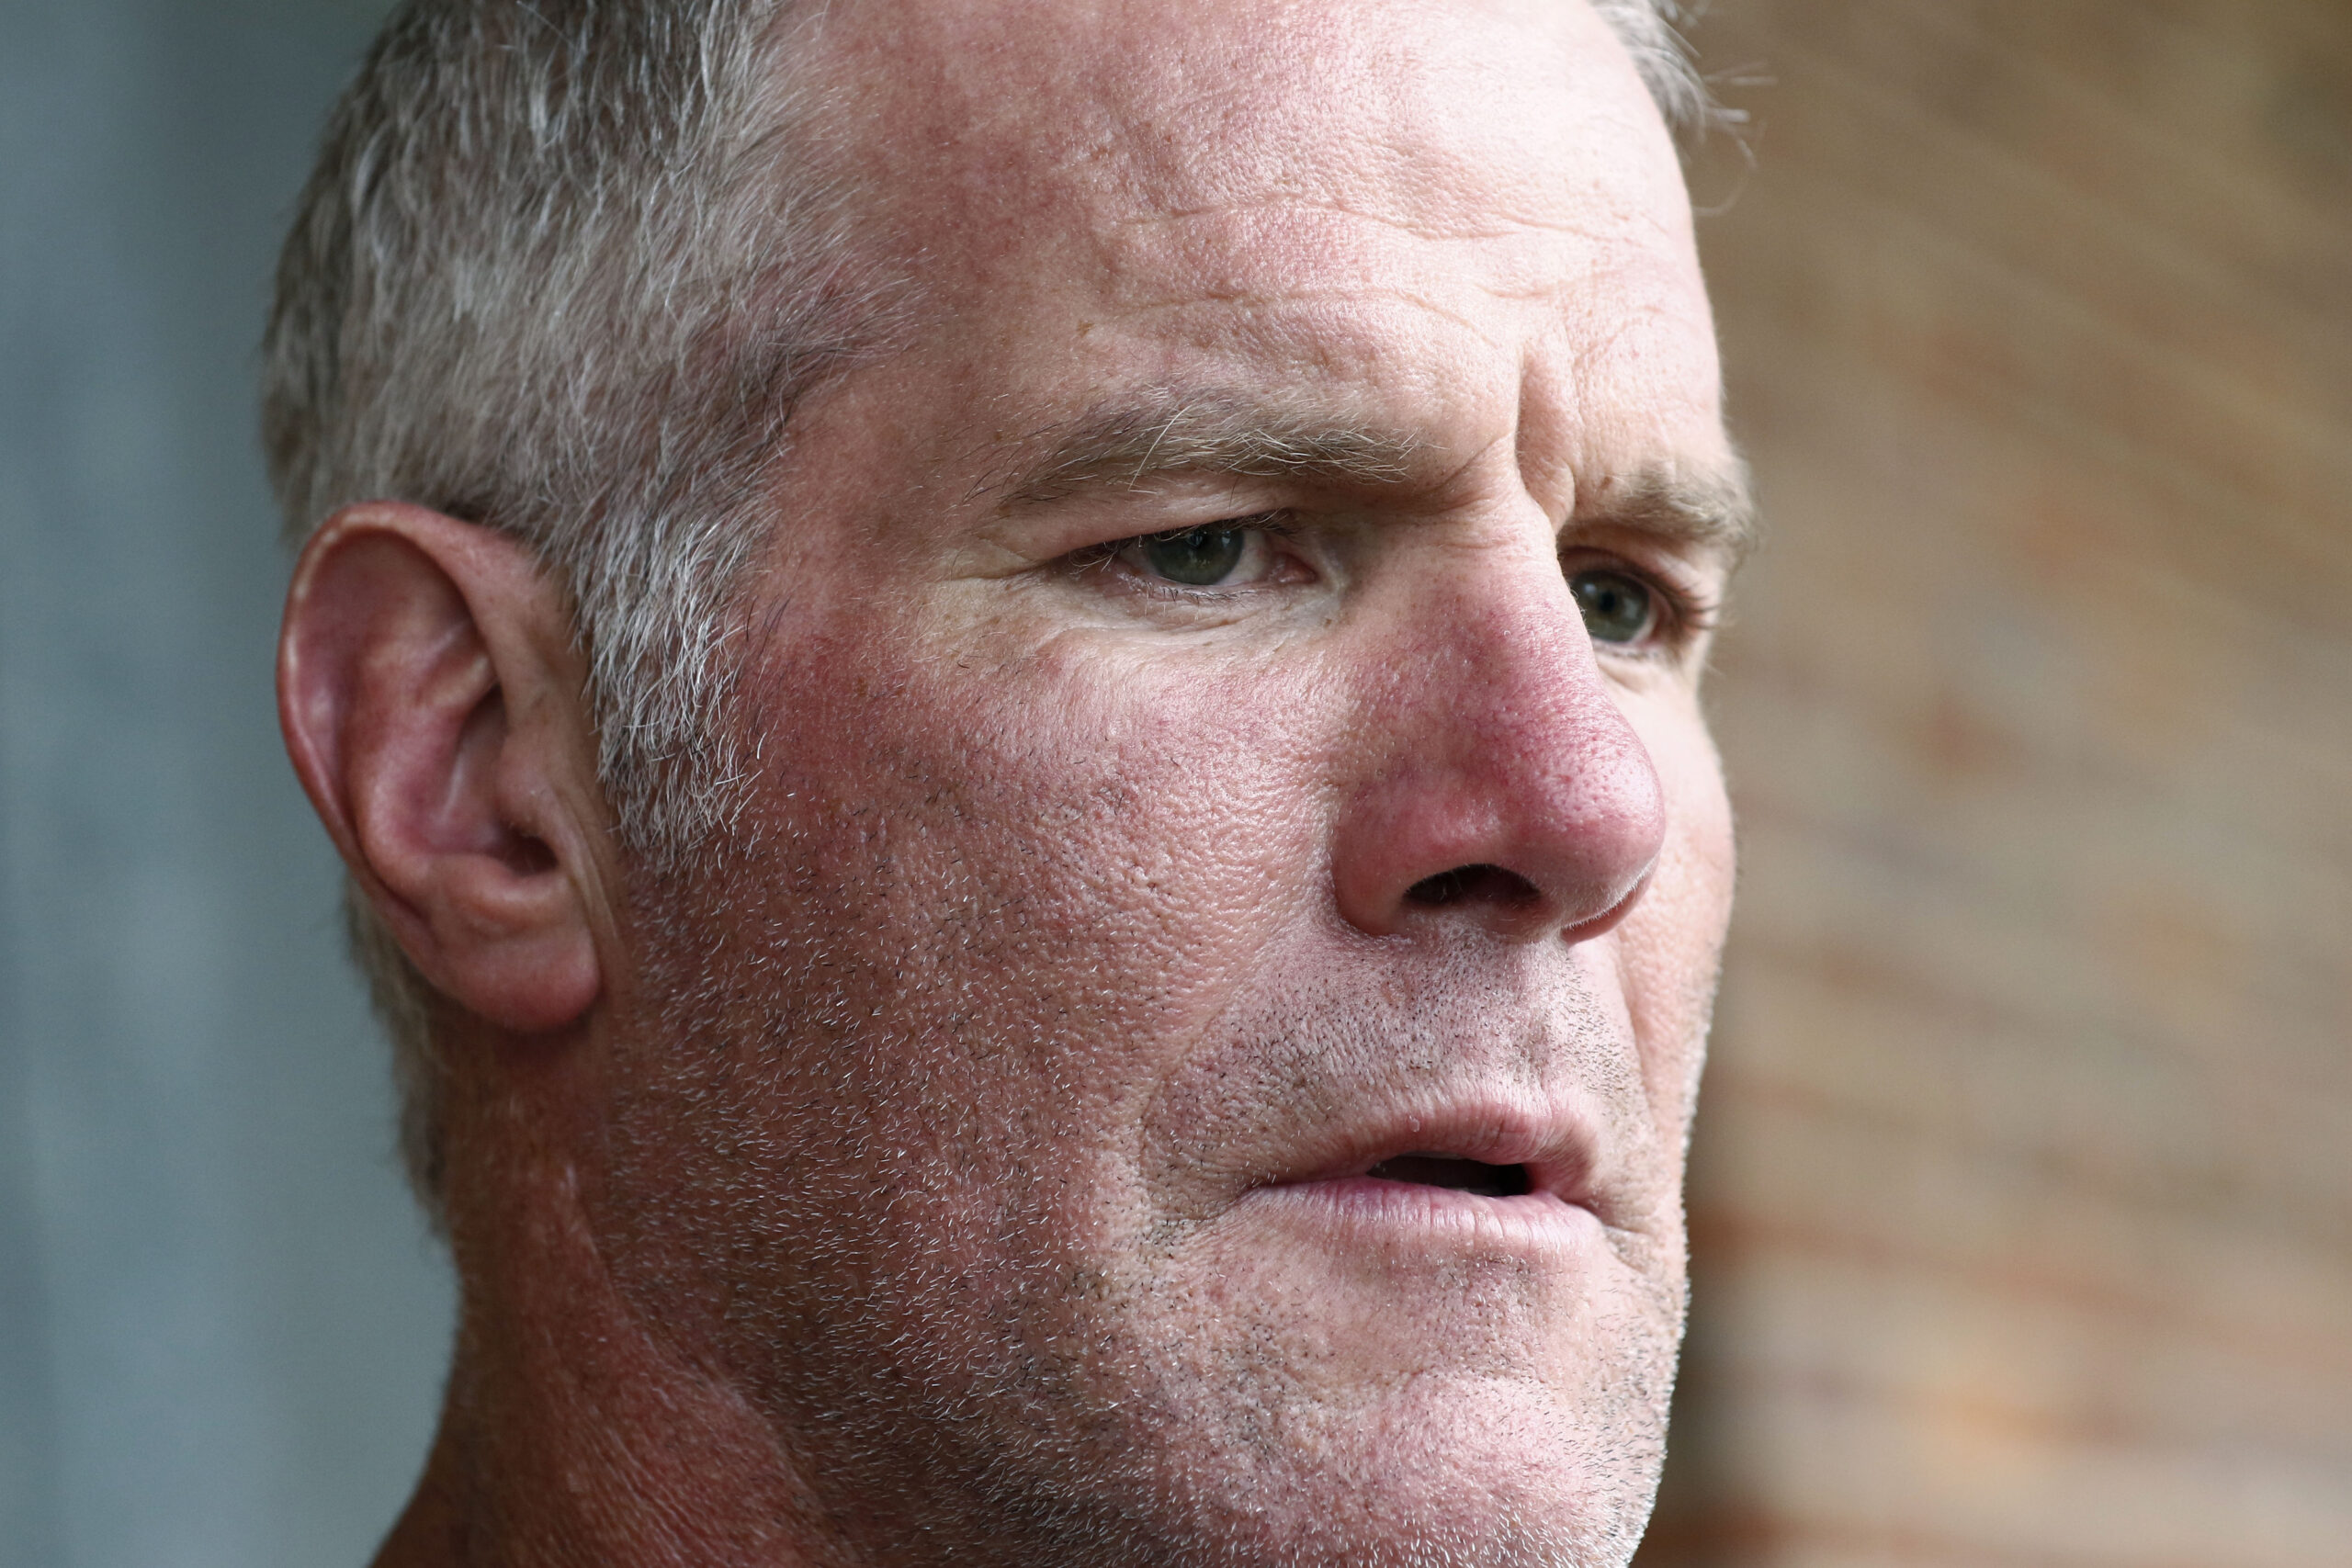 Favre repays $600K in Mississippi welfare case, auditor says